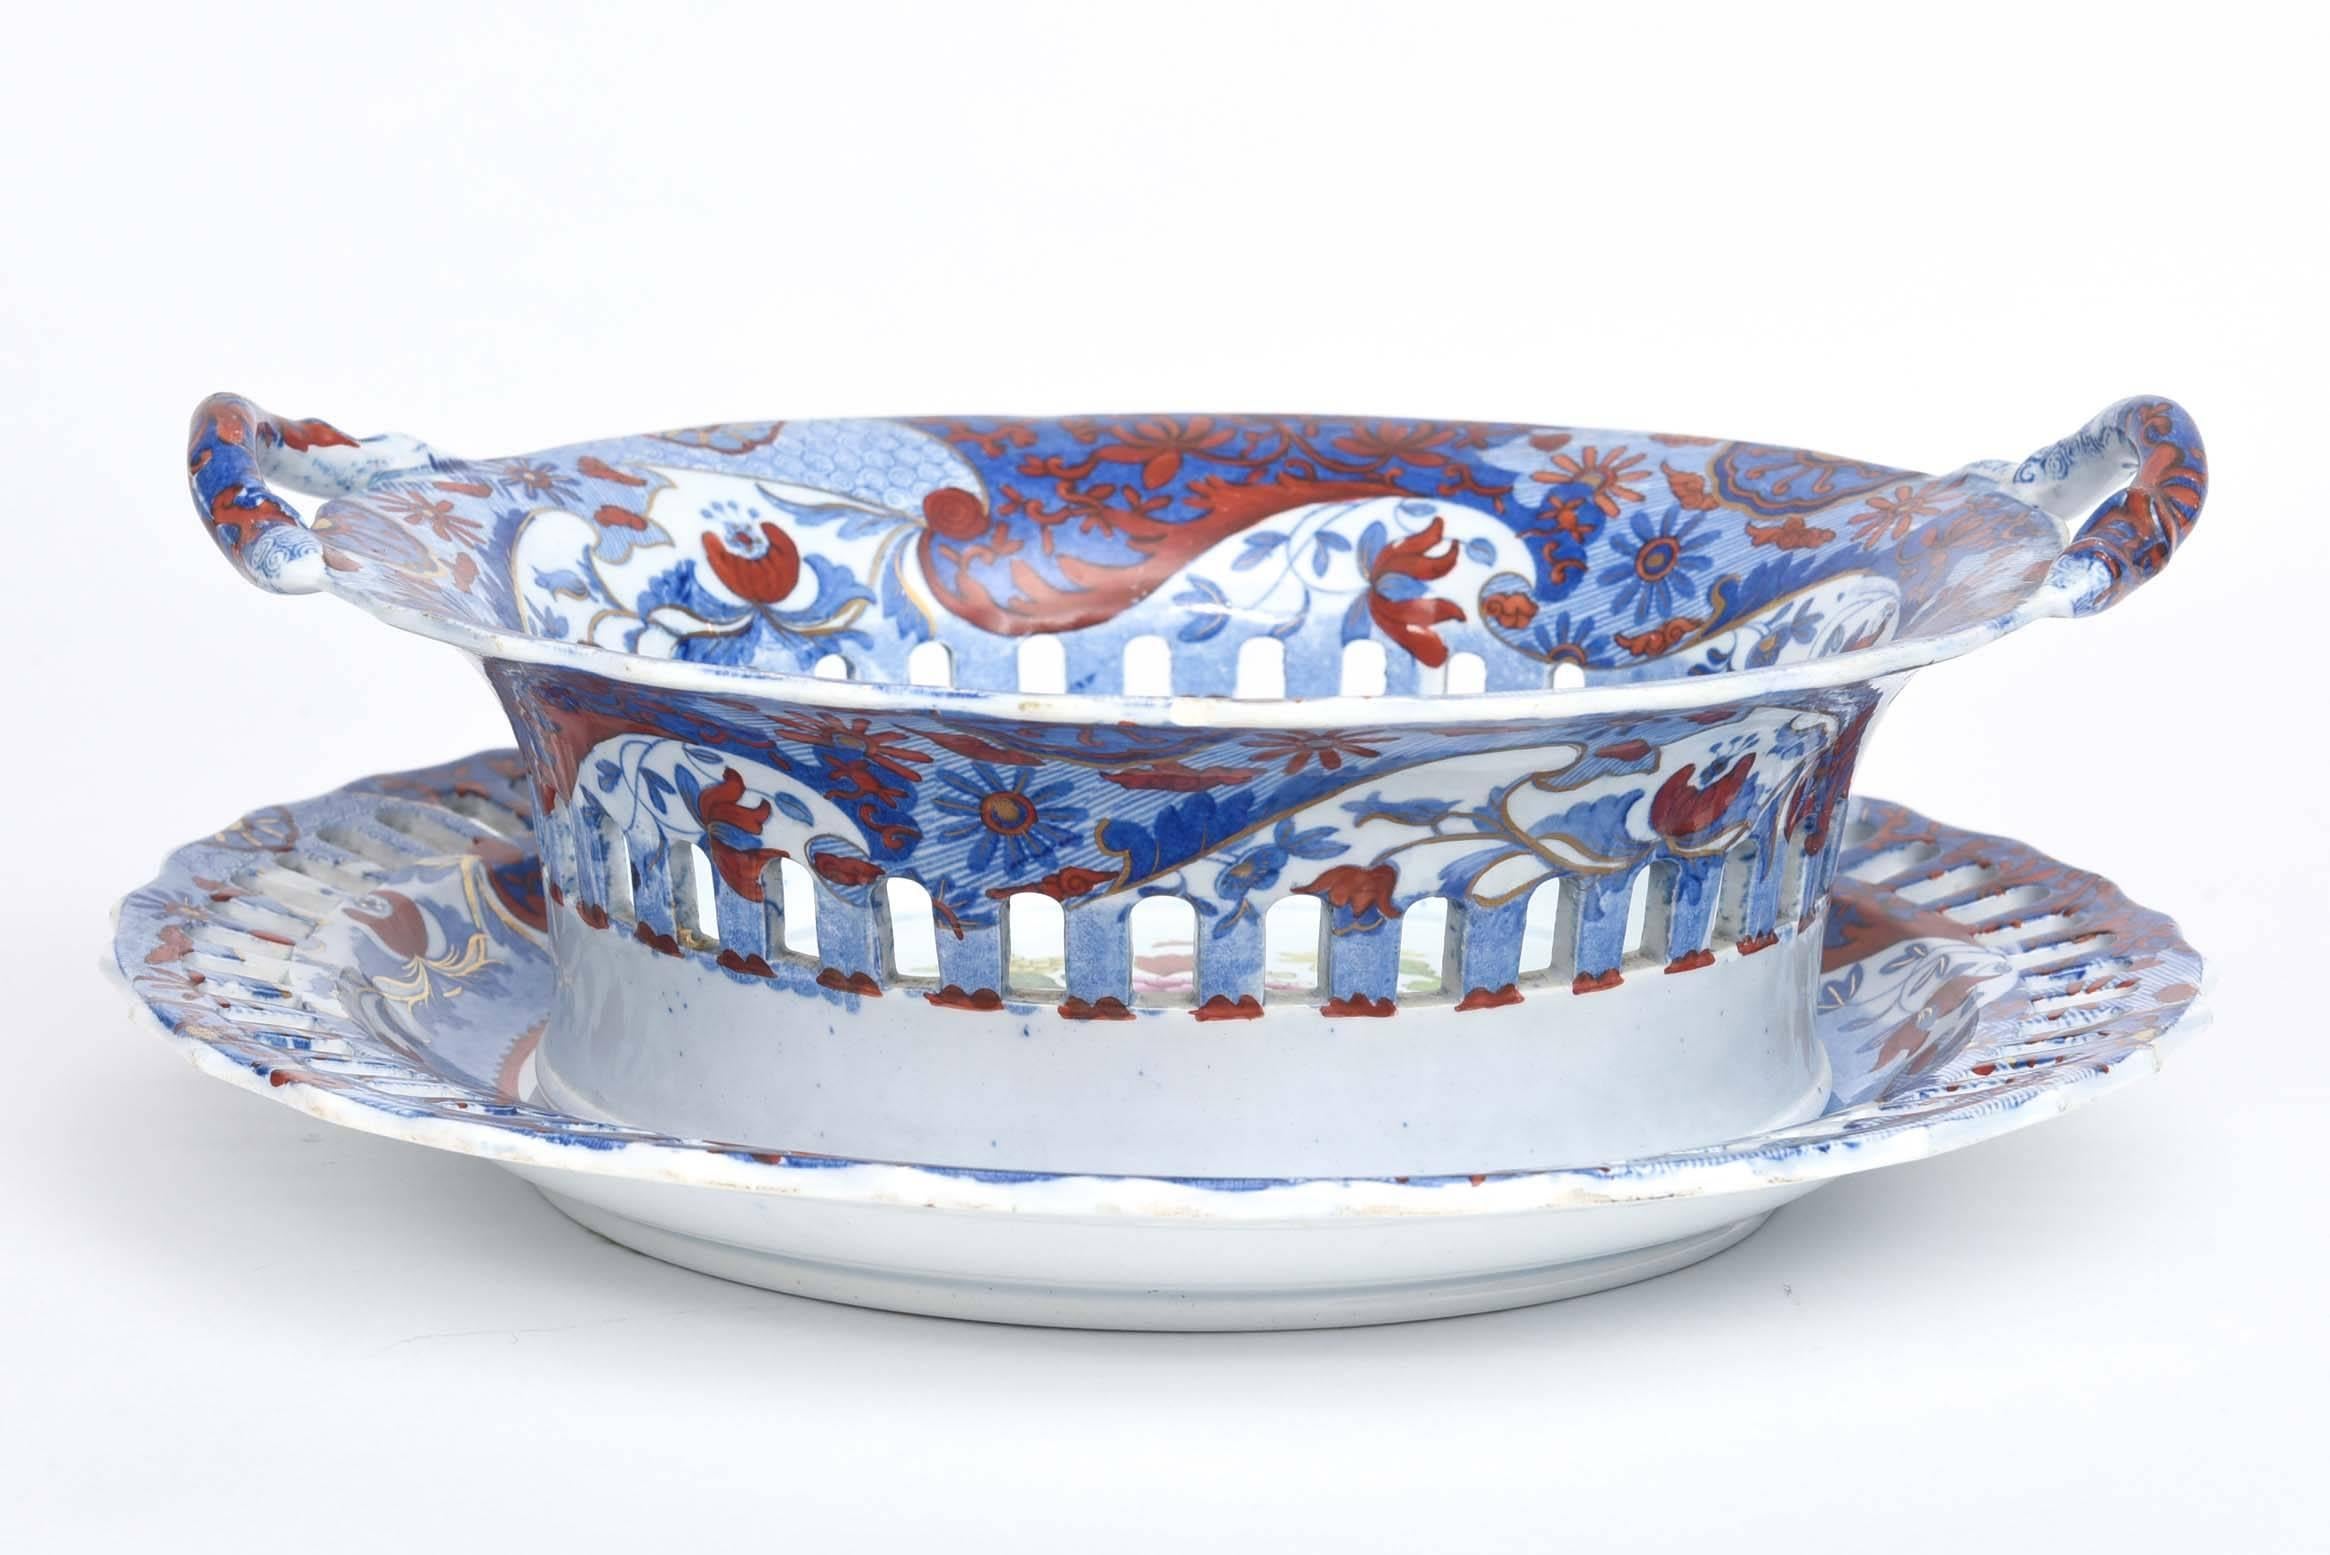 A charming antique English porcelain piece by Josiah Spode, England dating to the first quarter of the 1800s. Hand-cut reticulation on the center bowl and stand/underplate and nicely detailed polychrome painting throughout. The design featuring rich